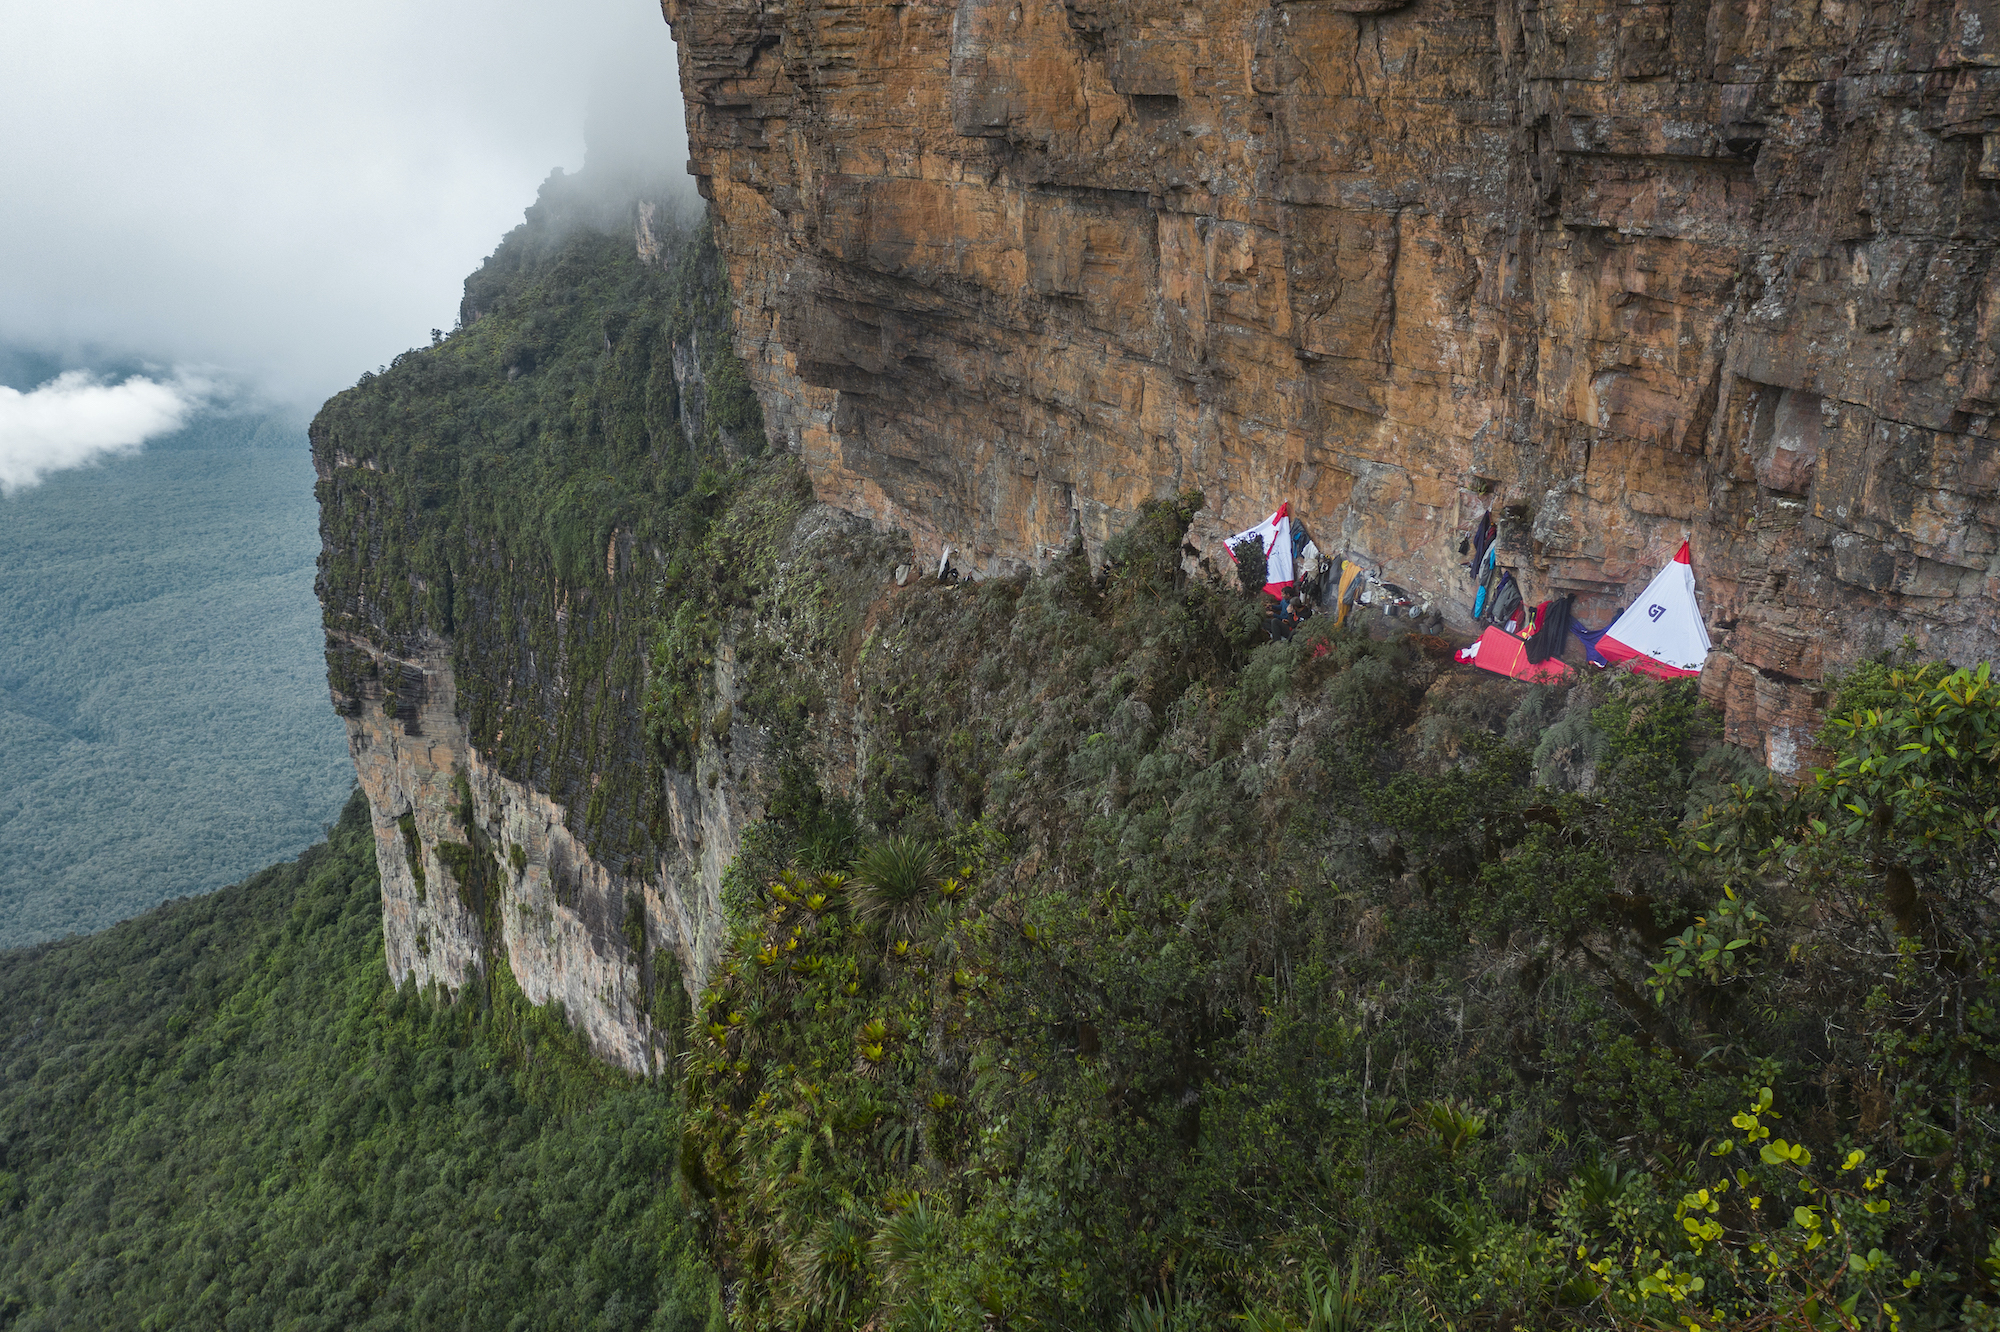 The climbing team settled into their wall camp at night on a tepui face deep in the Amazon.